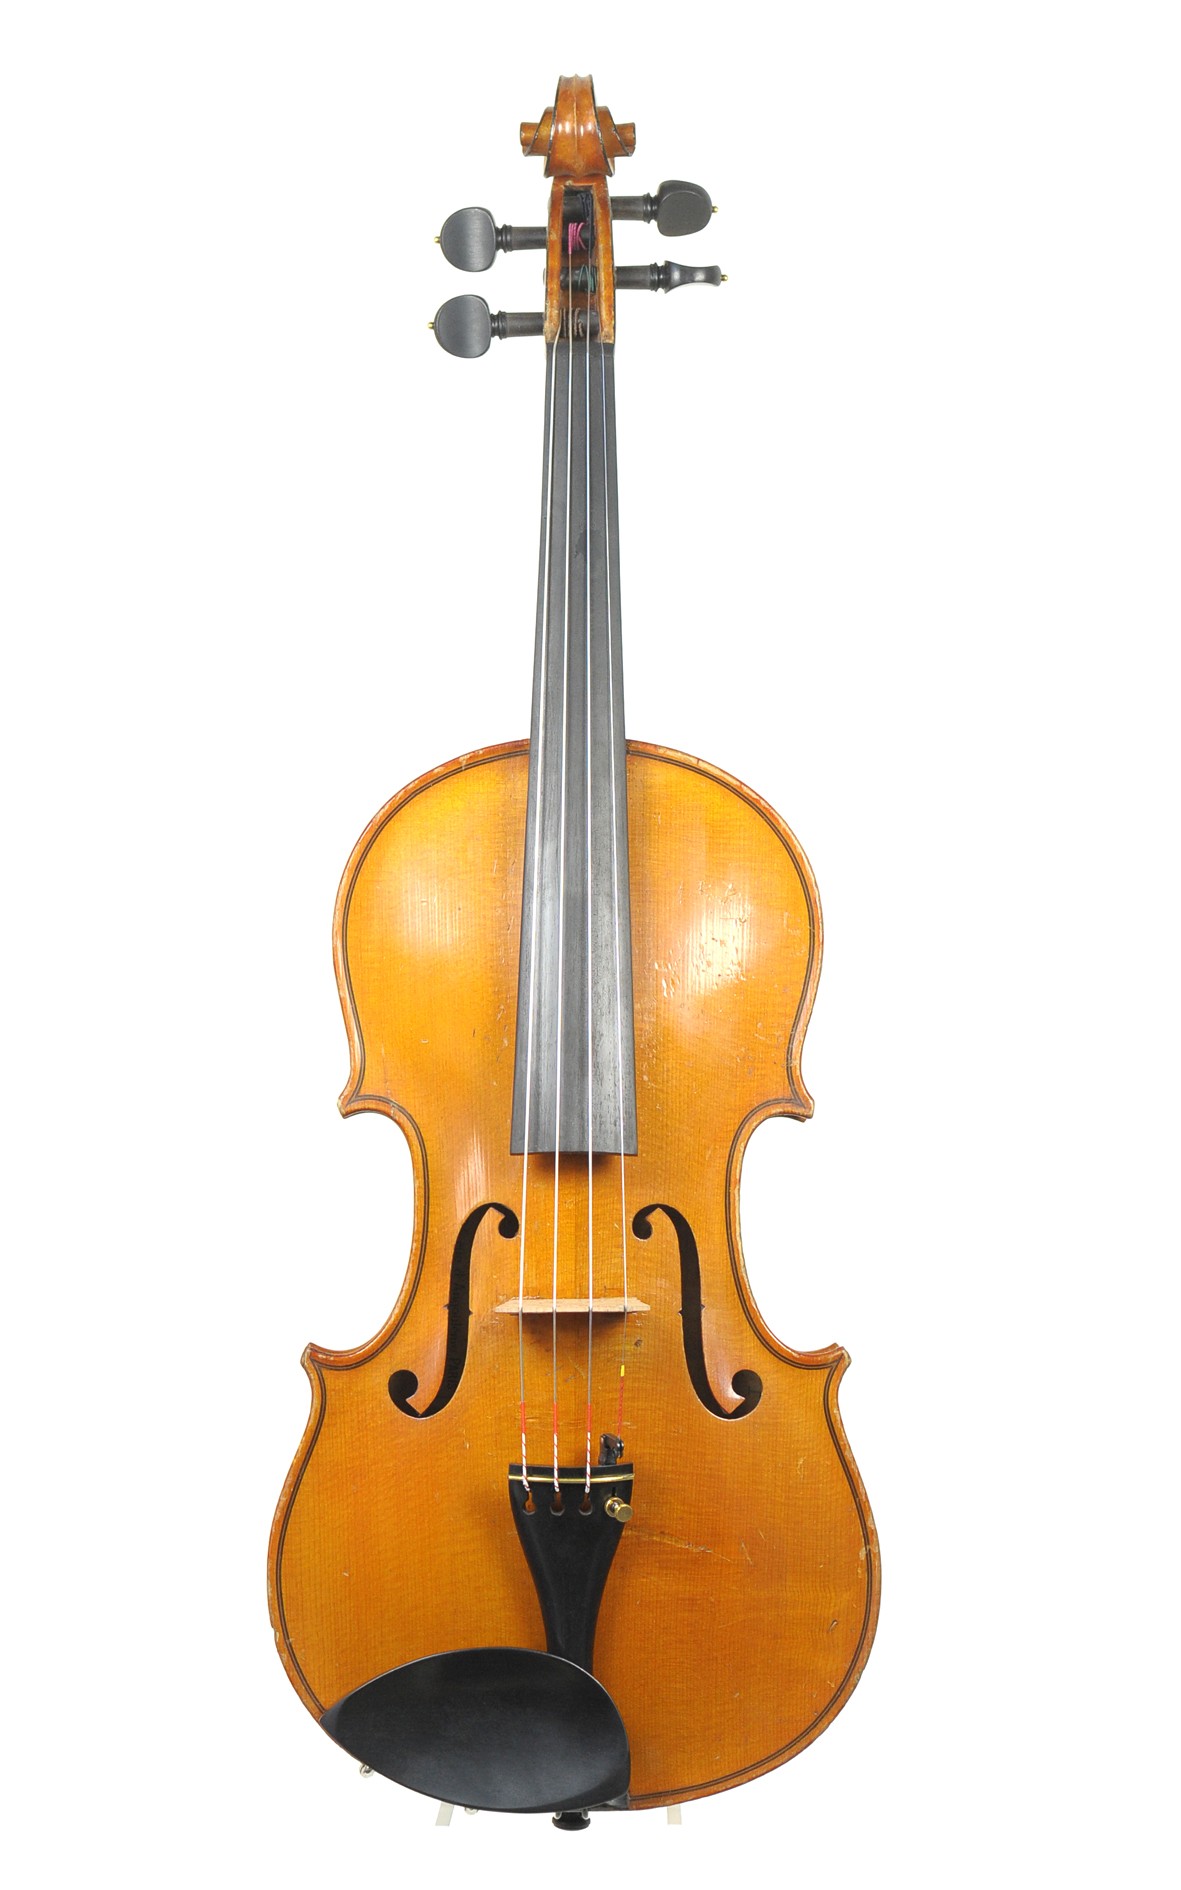 Mirecourt violin, Couesnon approx. 1910 - top